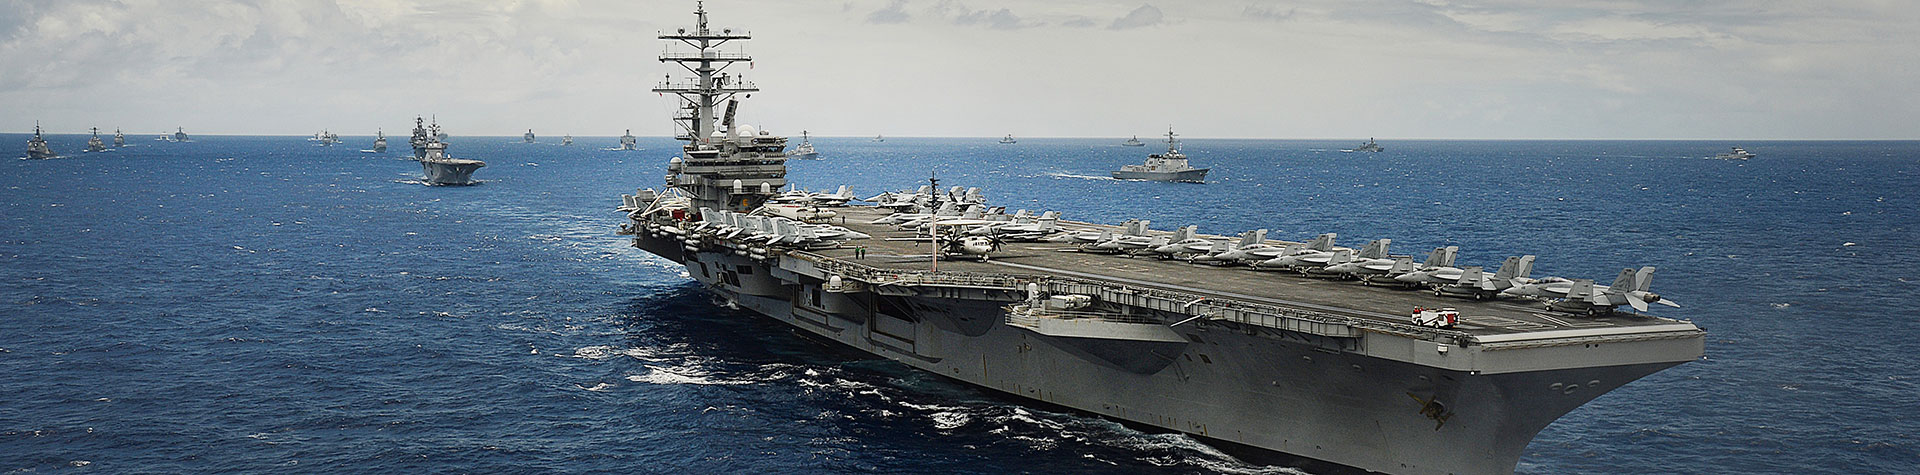 United States Aircraft Carrier at sea